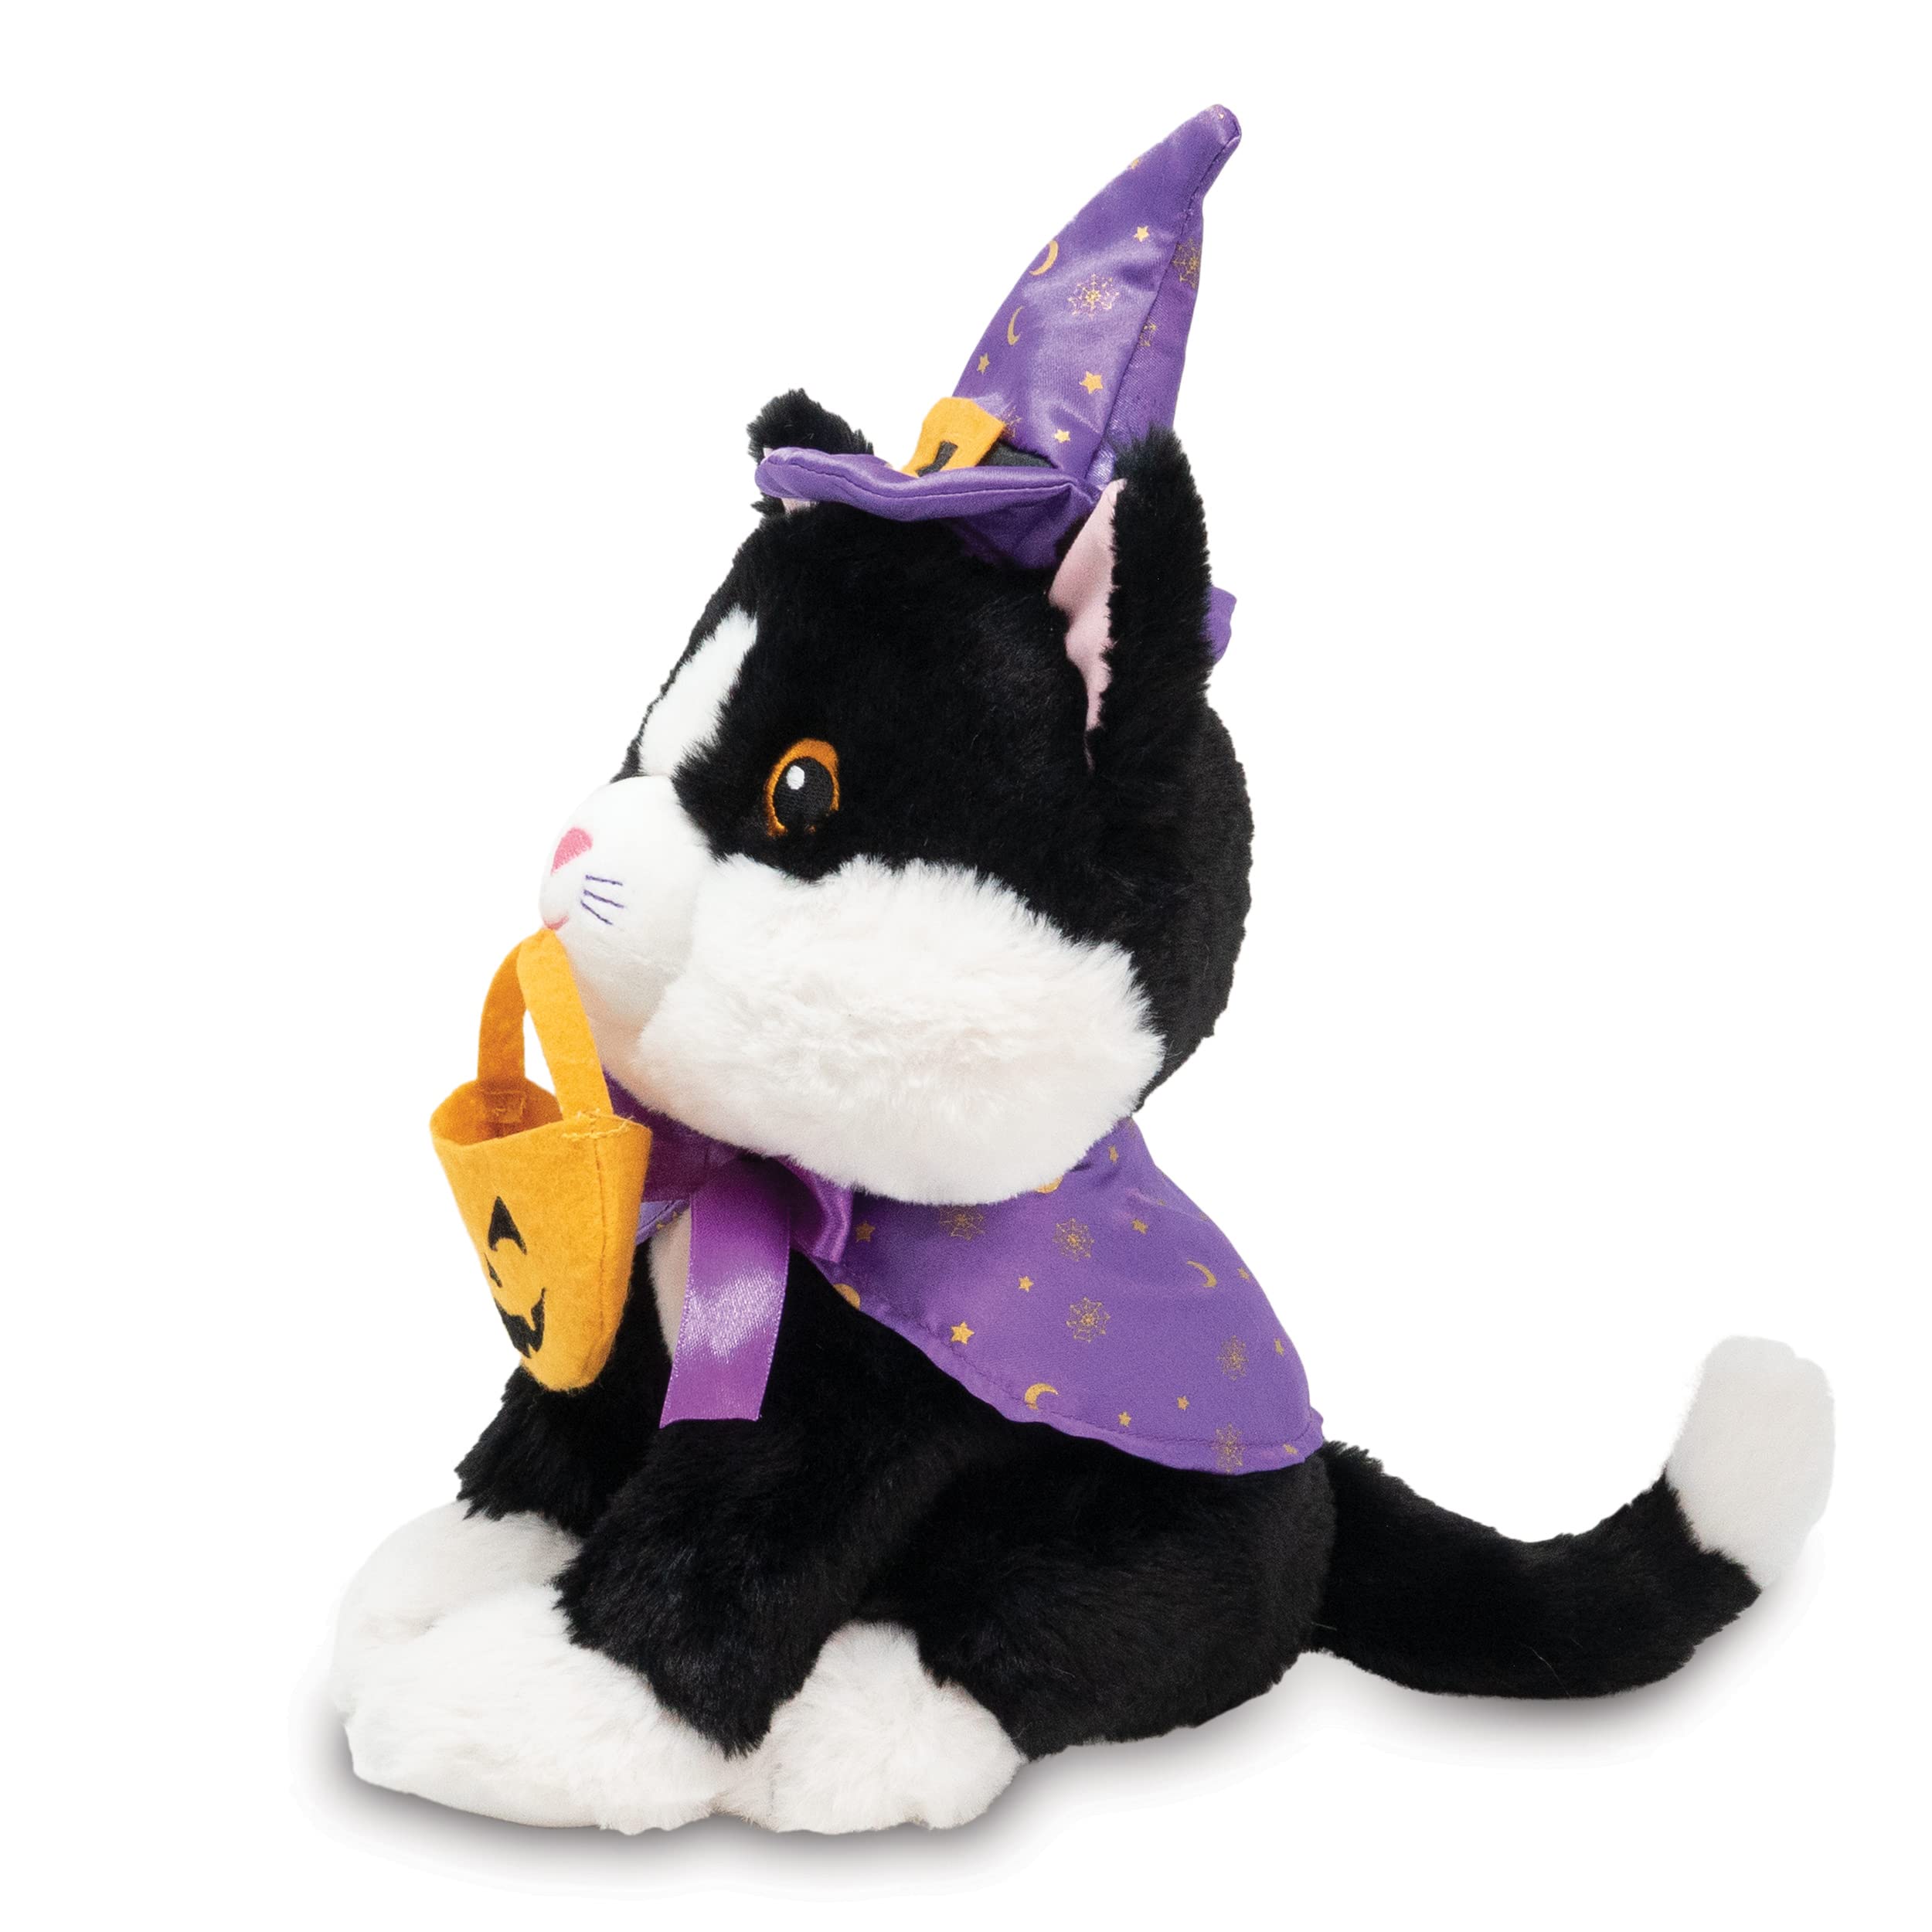 Cuddle Barn - Trick-or-Treat Tammy | Animated Halloween Tuxedo Cat Stuffed Animal Plush Toy, Dressed as Wizard Twirls to I Want Candy, 9 inches